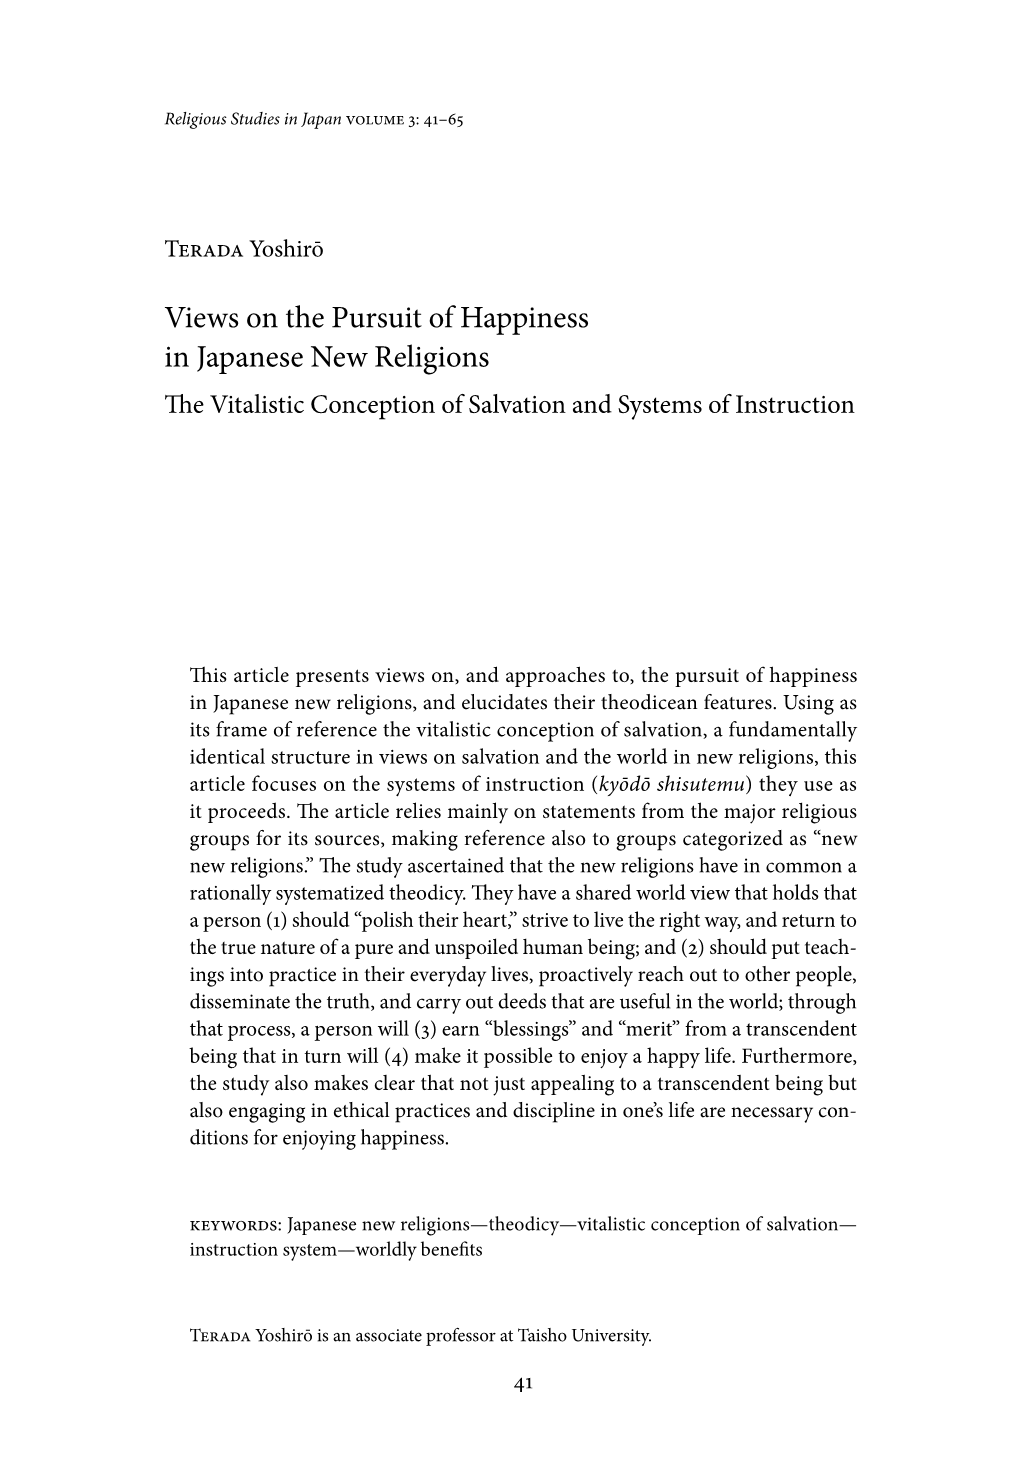 Views on the Pursuit of Happiness in Japanese New Religions the Vitalistic Conception of Salvation and Systems of Instruction